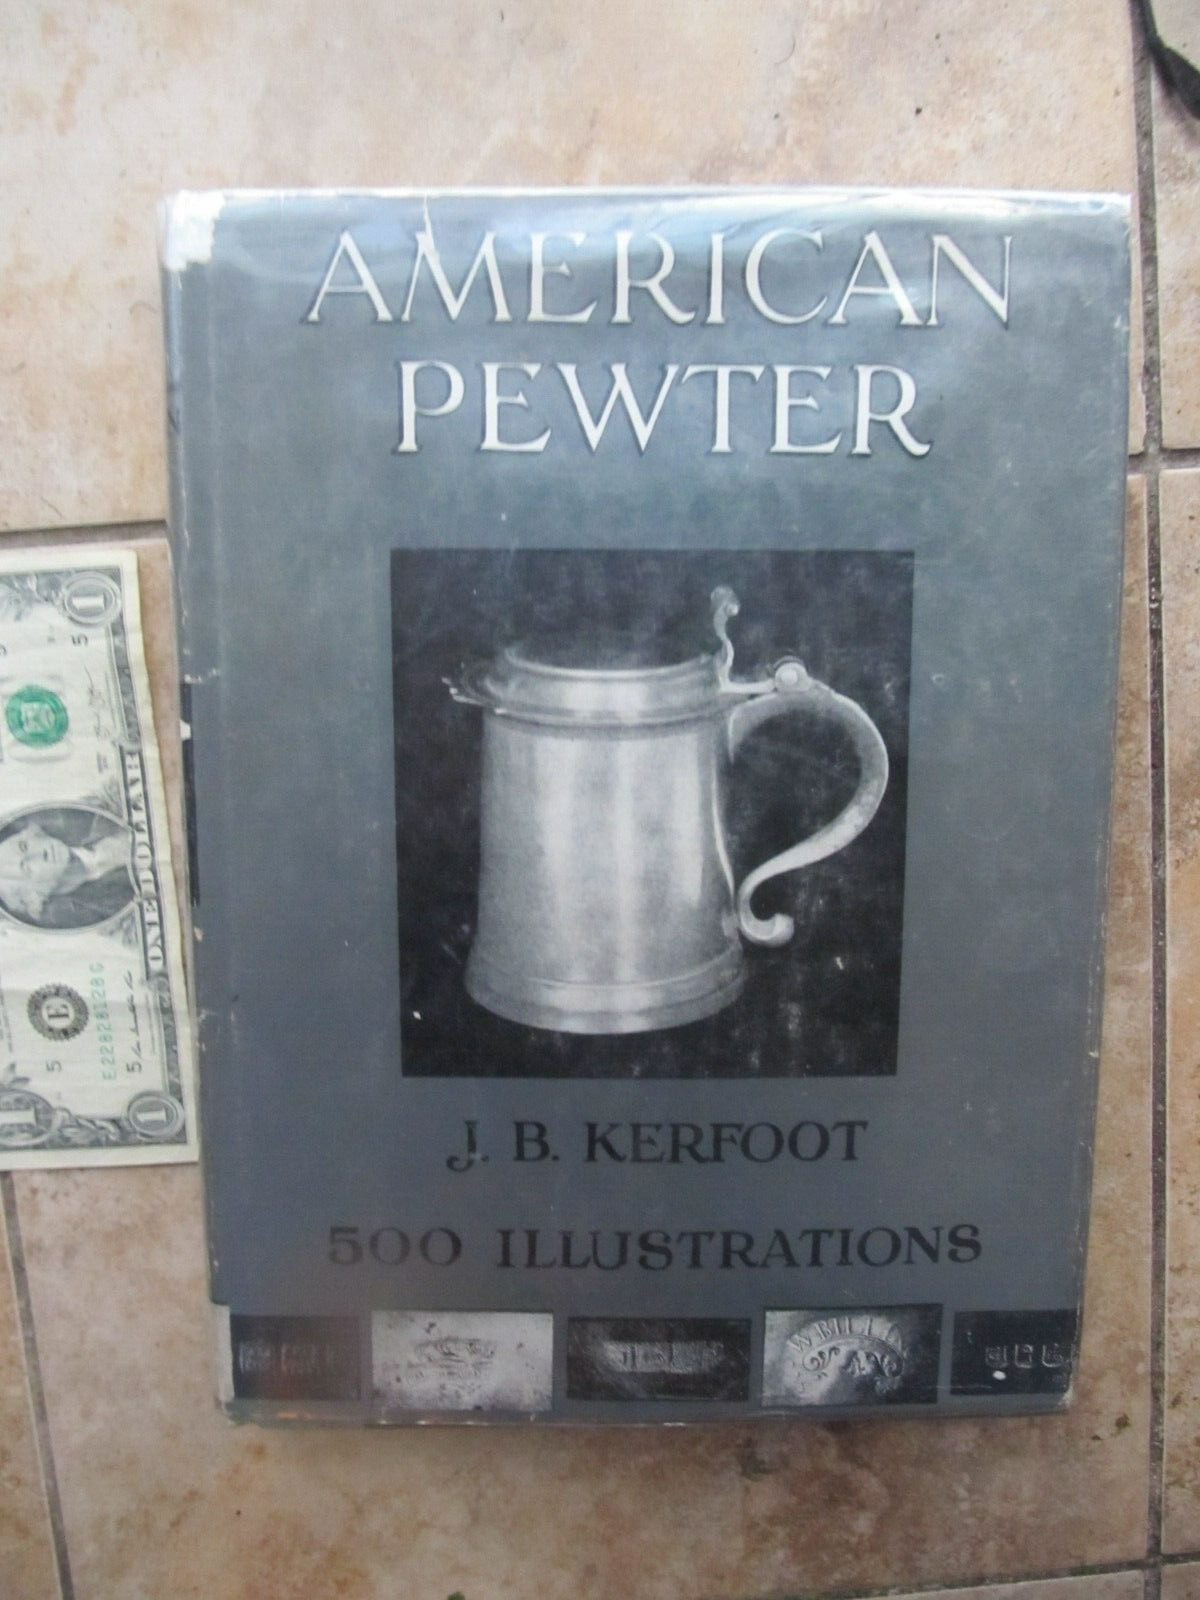 Rare 1924 Antique American Pewter Reference Book, Kerfoot, Makers & Marks, Gift